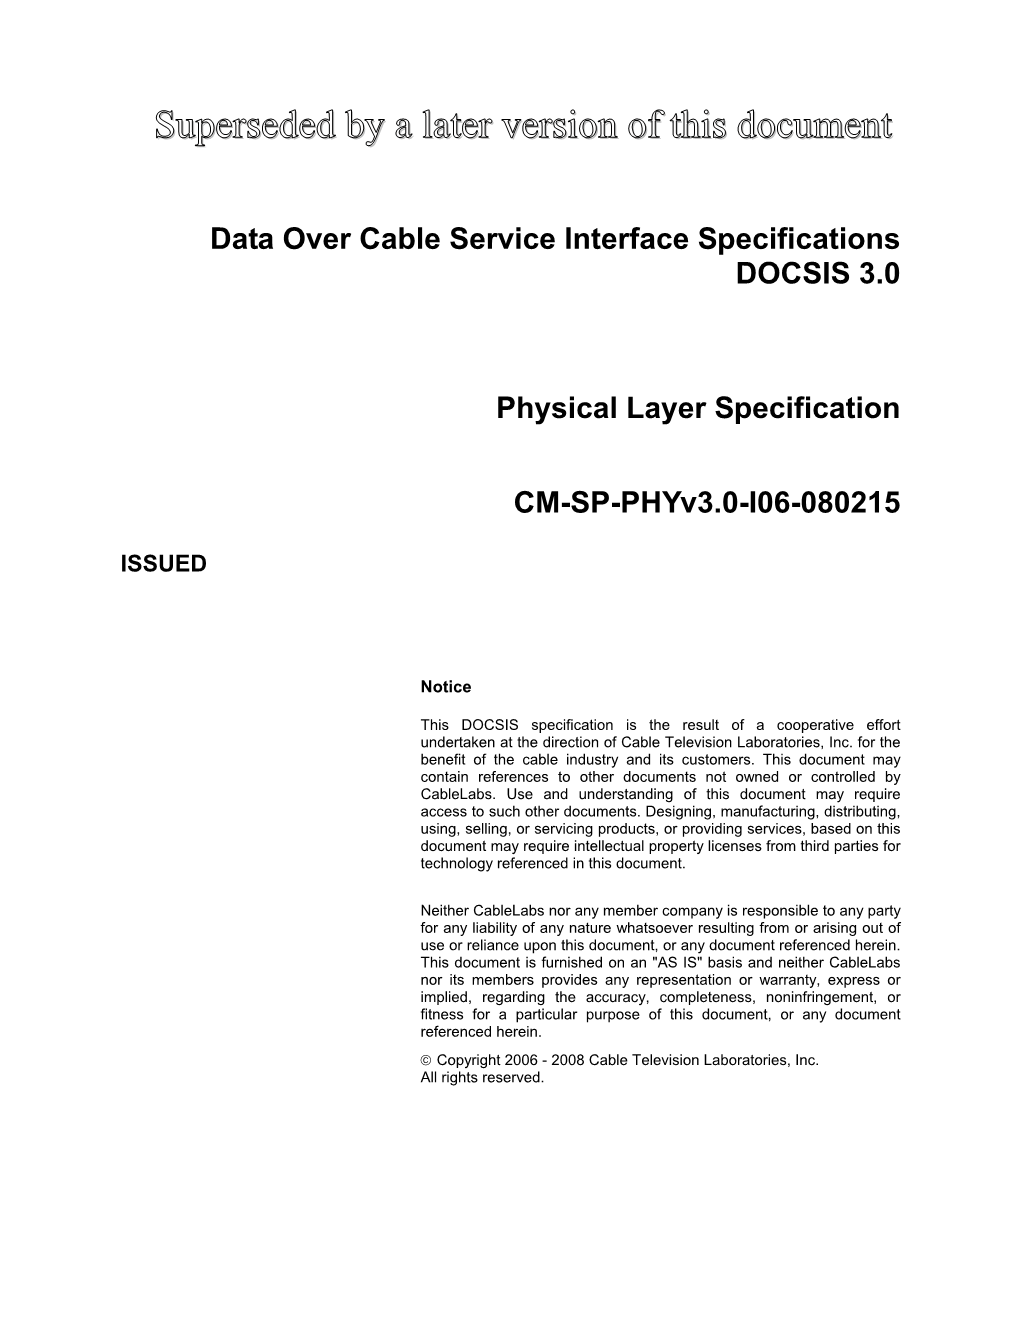 Superseded Data Over Cable Service Interface Specifications DOCSIS 3.0